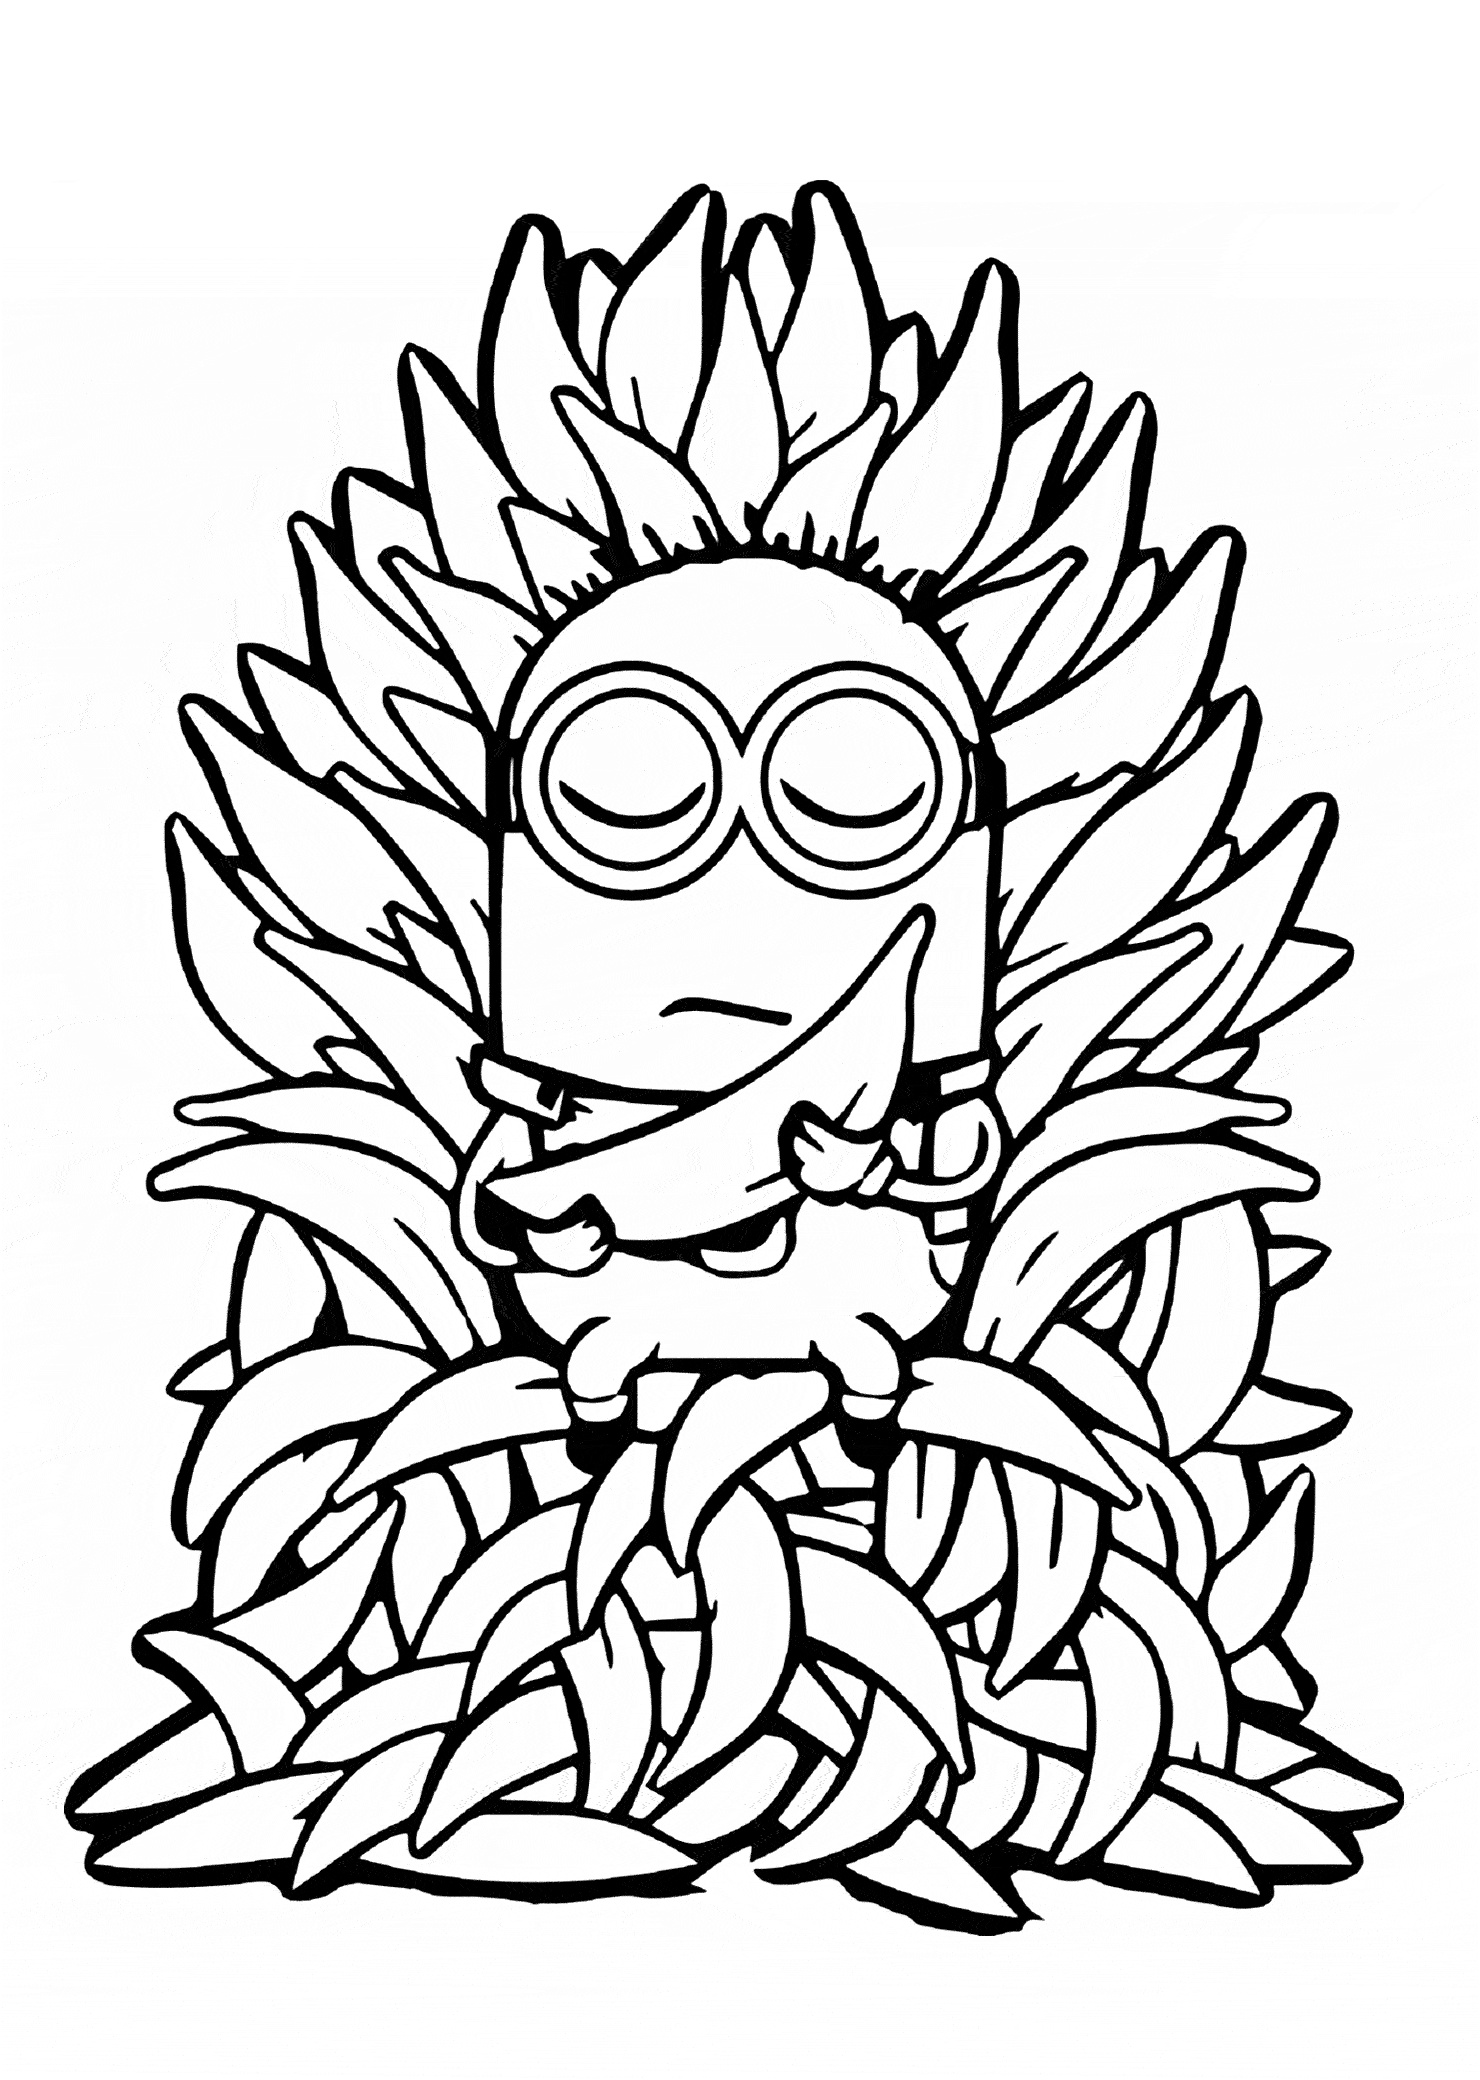 image=minions Coloring for kids minions 9580 2